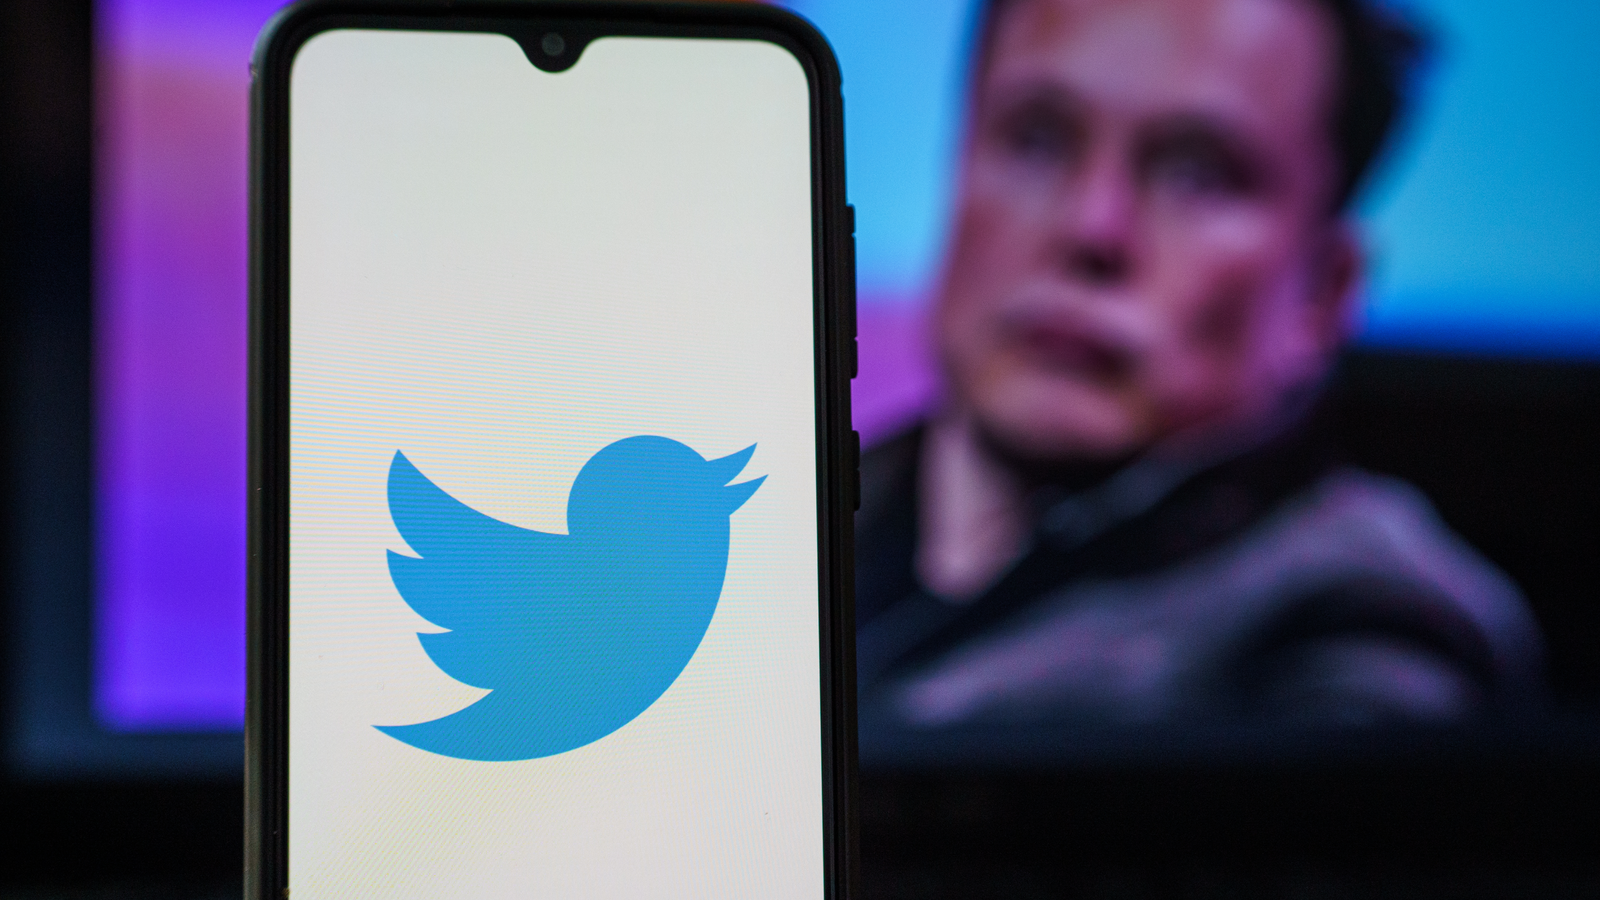 Twitter (TWTR) logo on smartphone and Elon Musk in the background.